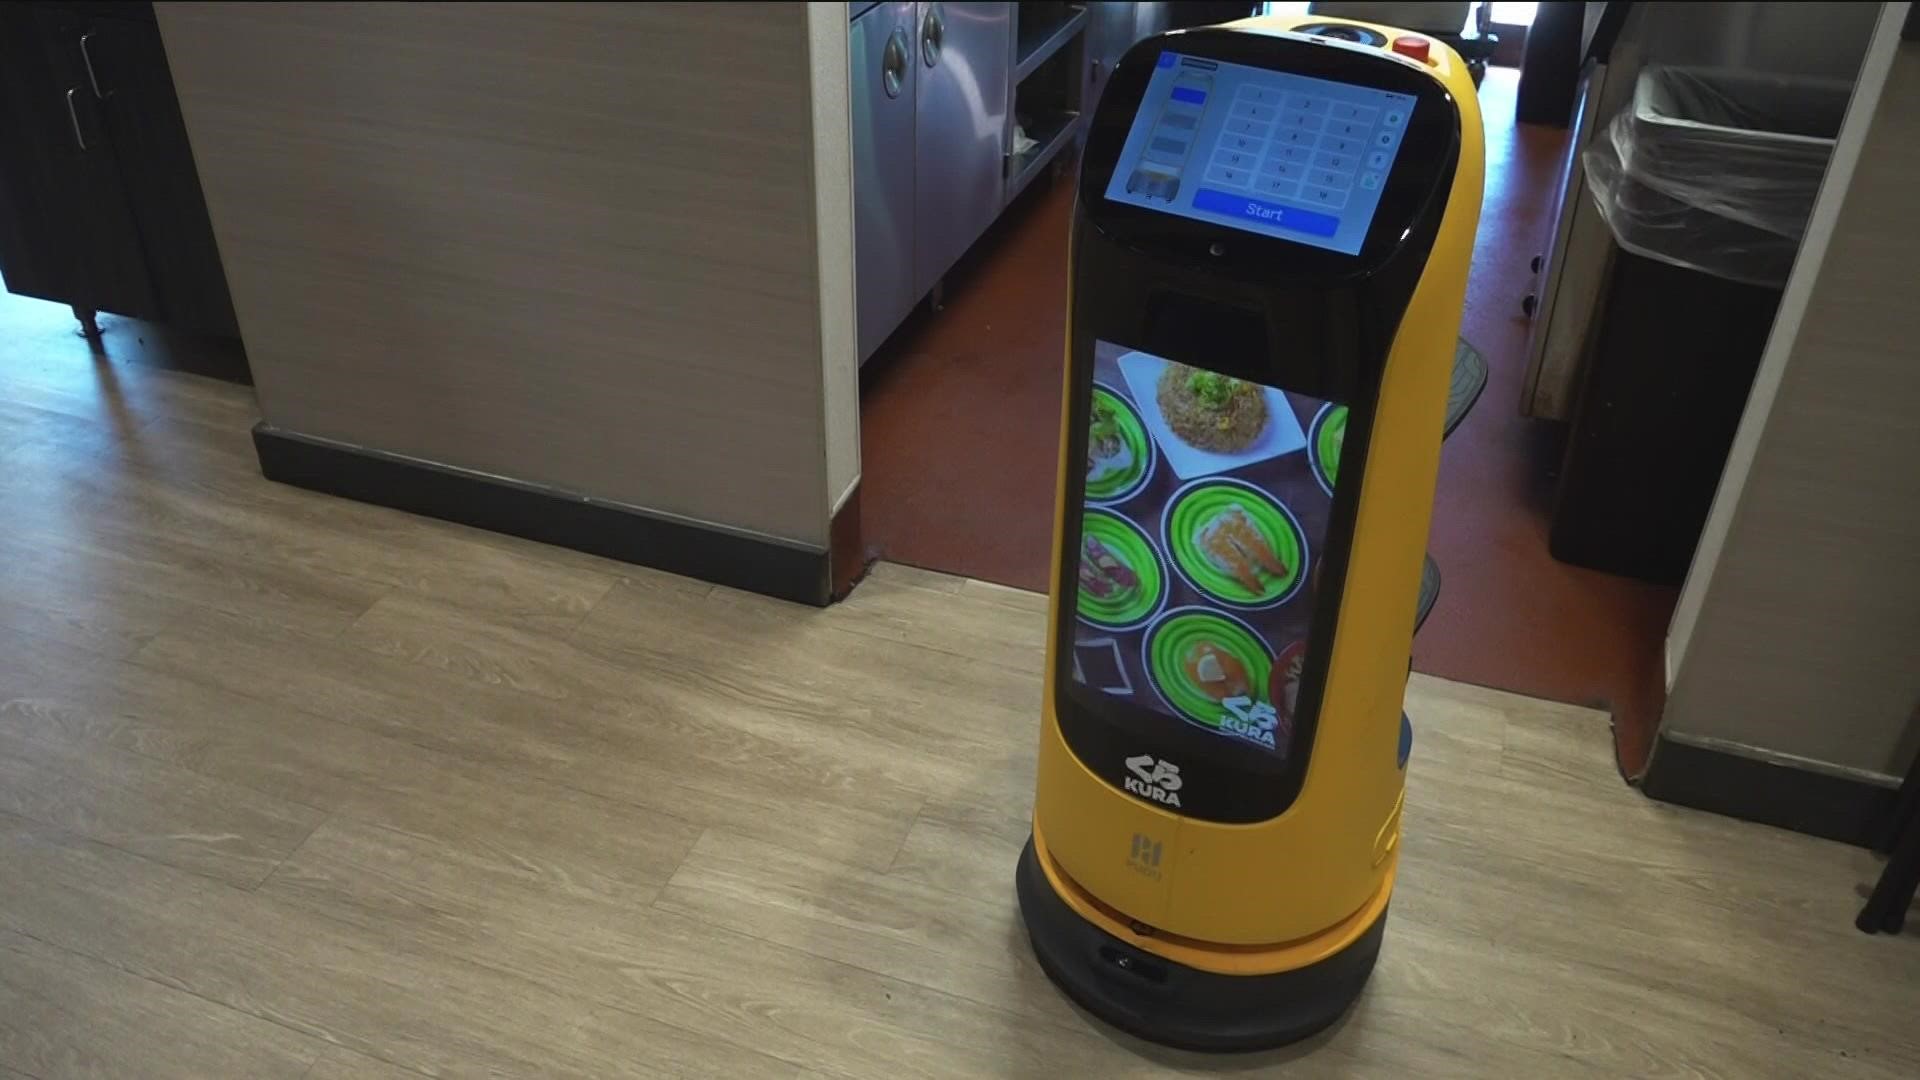 One Valley restaurant explains why they've begun to use mobile robots to help serve their customers.